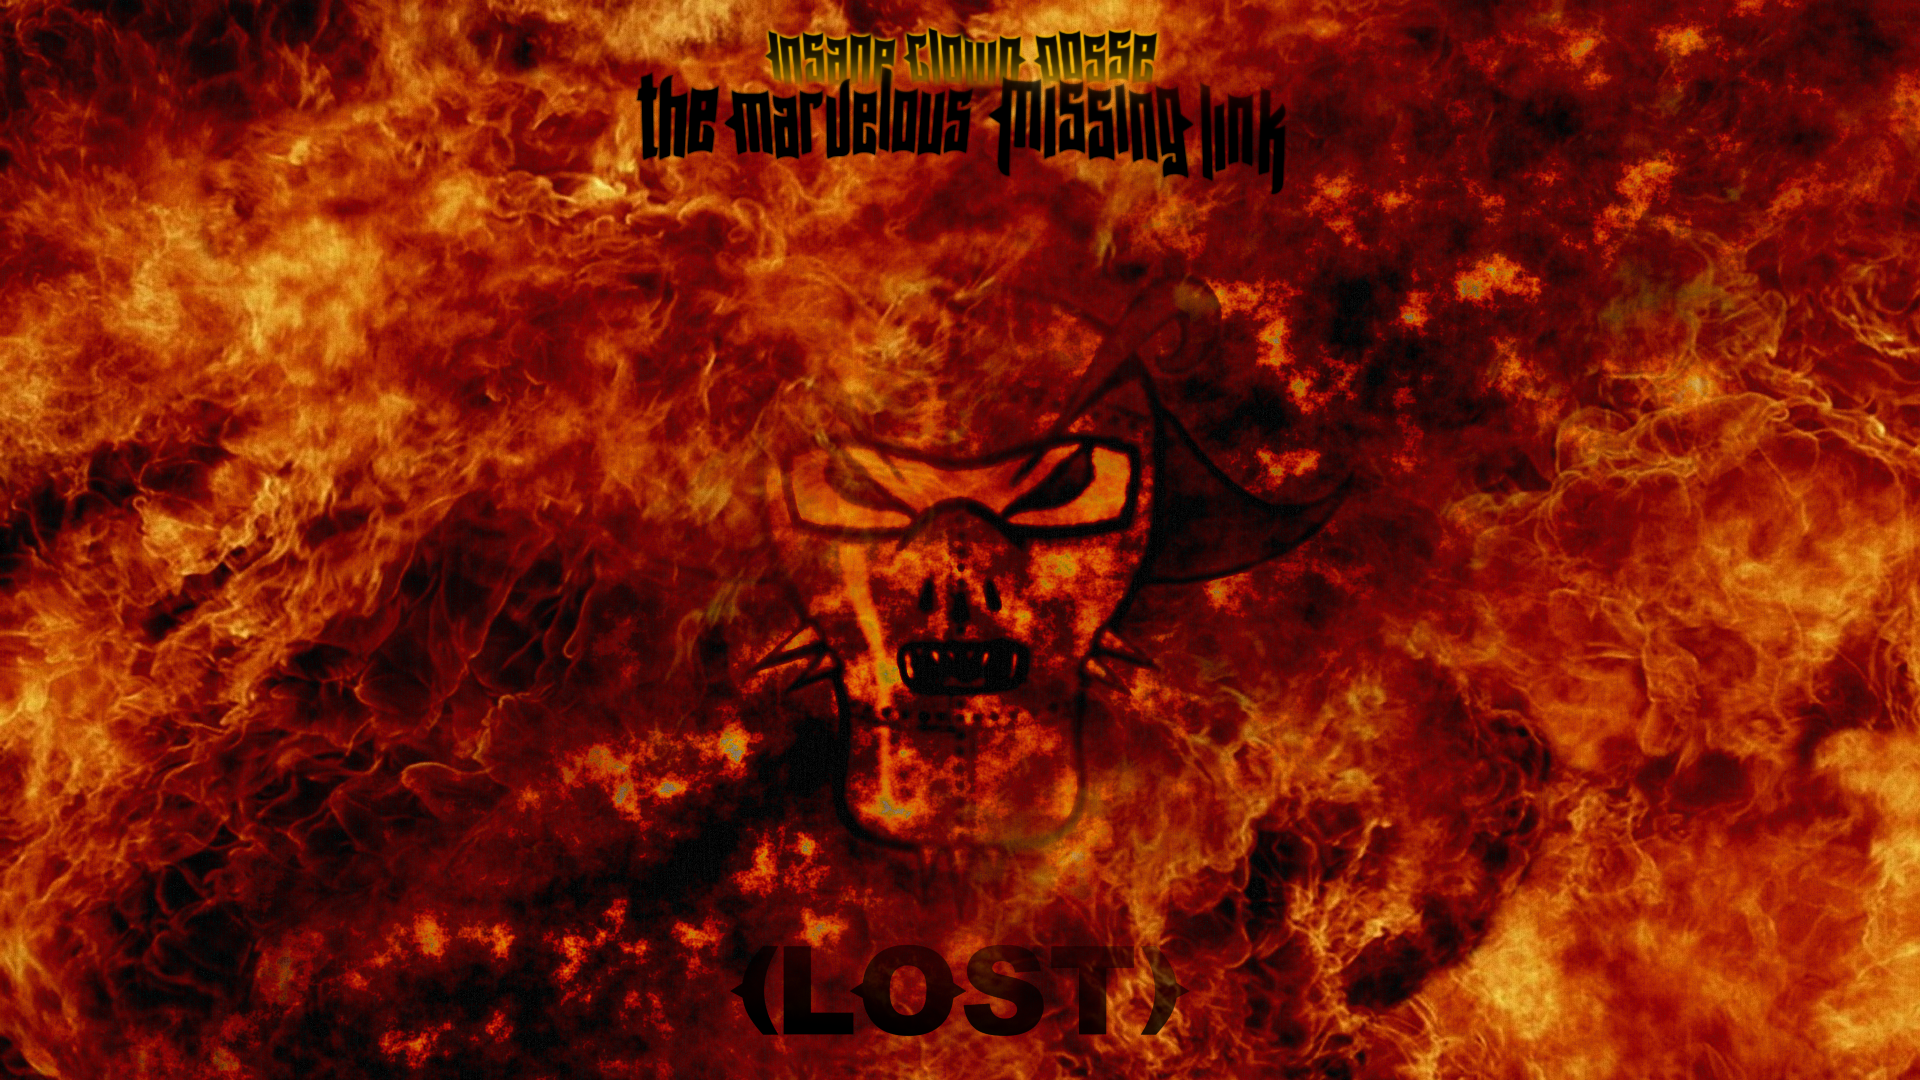 The Marvelous Missing Link Lost Hell Wallpaper Juggalo